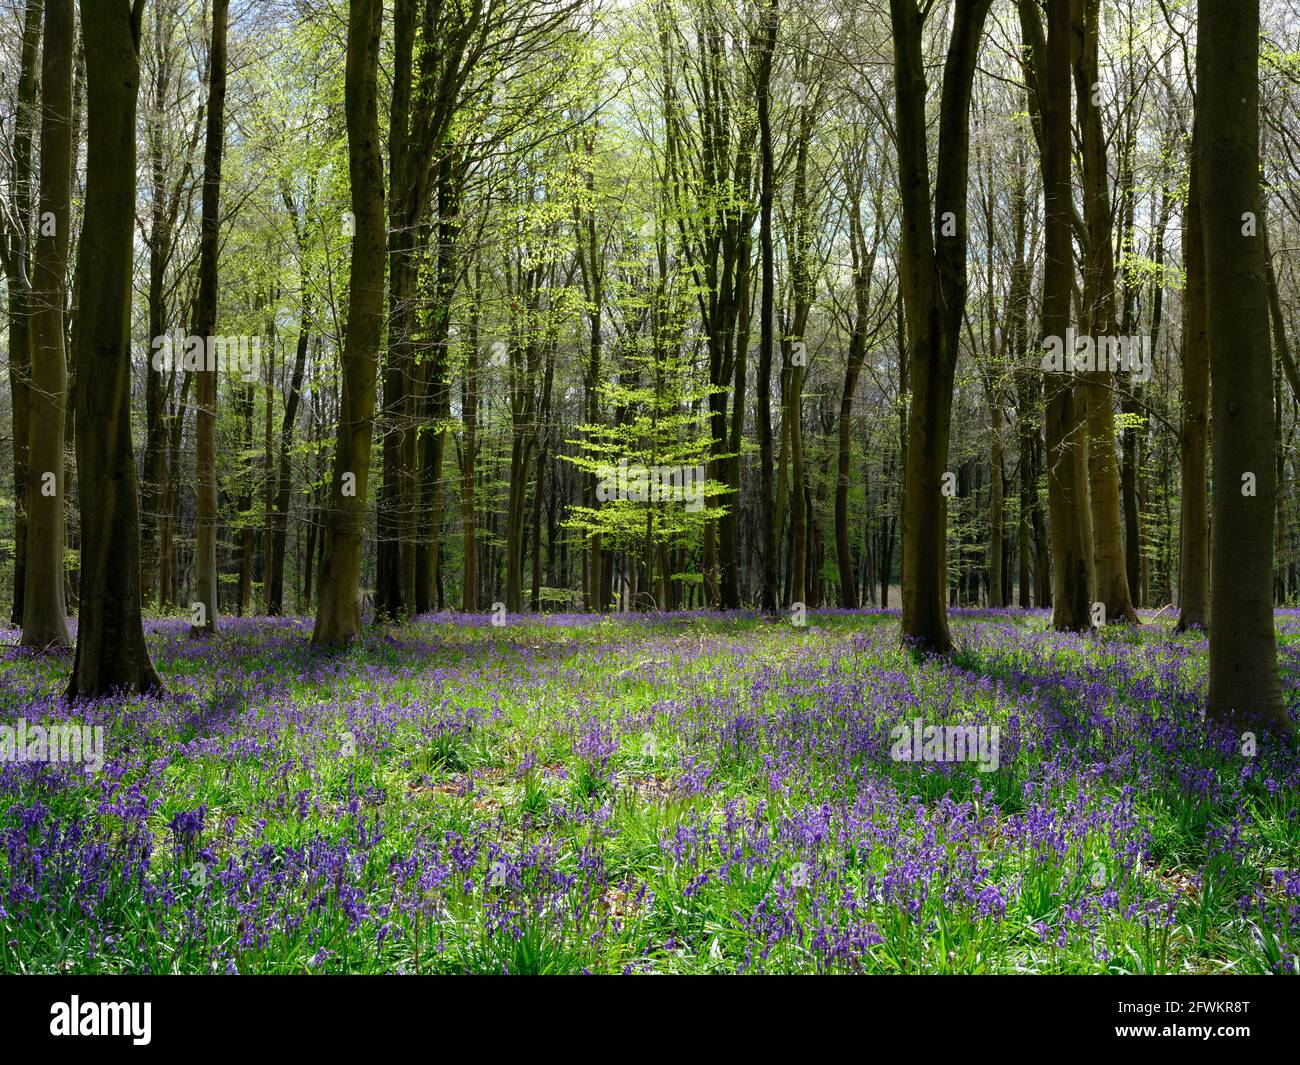 A carpet of Bluebells (Hyacinthoides non-scripta) covering a woodland floor surrounded by slim trees and a lone fern in the background, England, UK Stock Photo